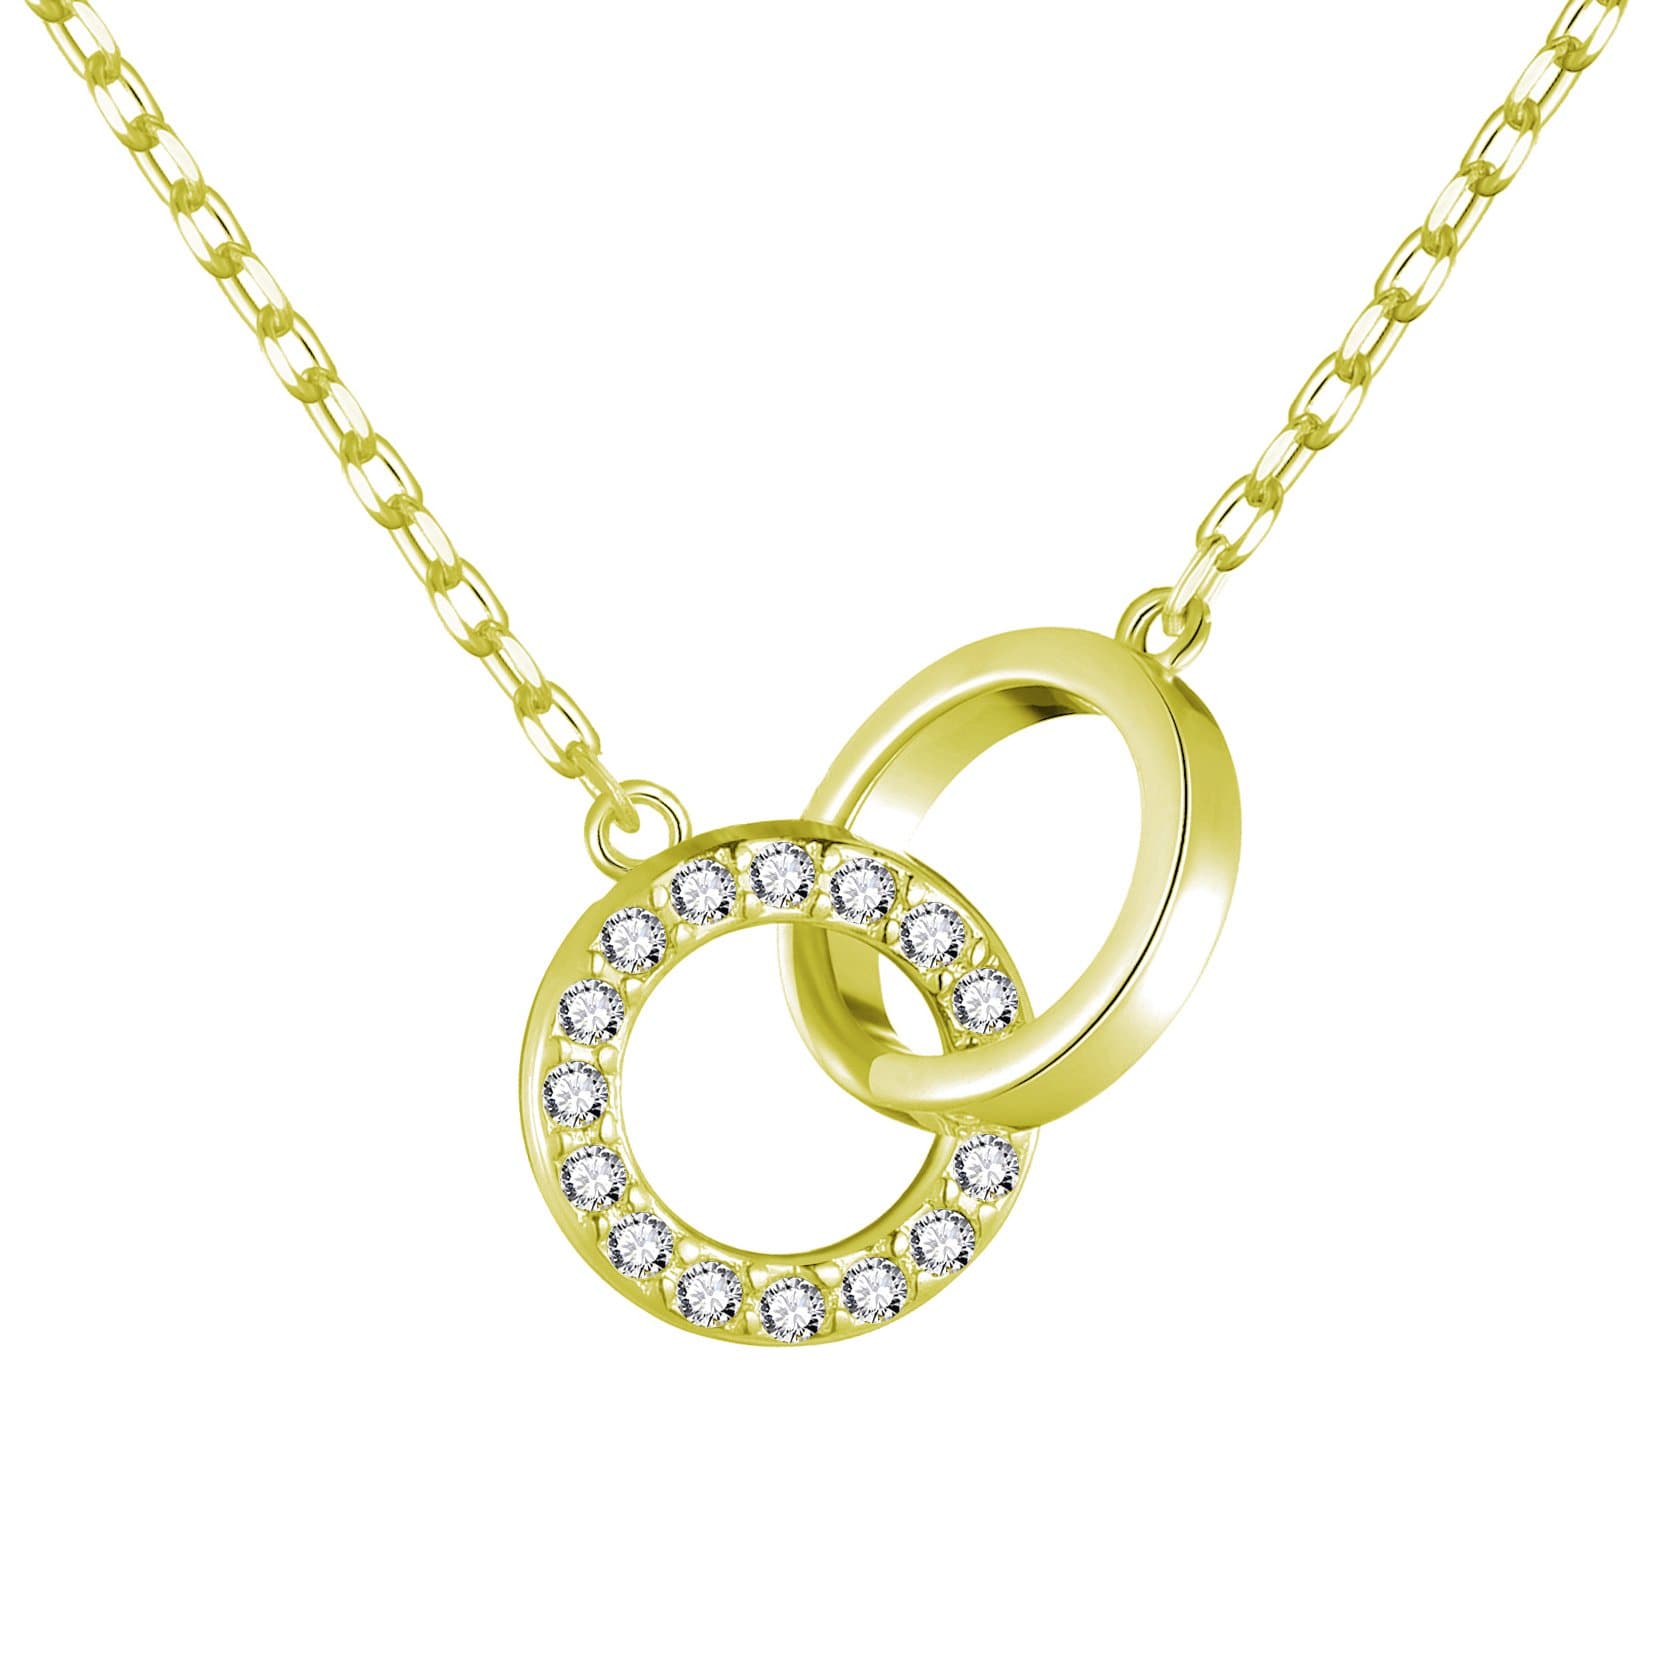 Gold Plated Circle Link Necklace Created with Zircondia® Crystals by Philip Jones Jewellery